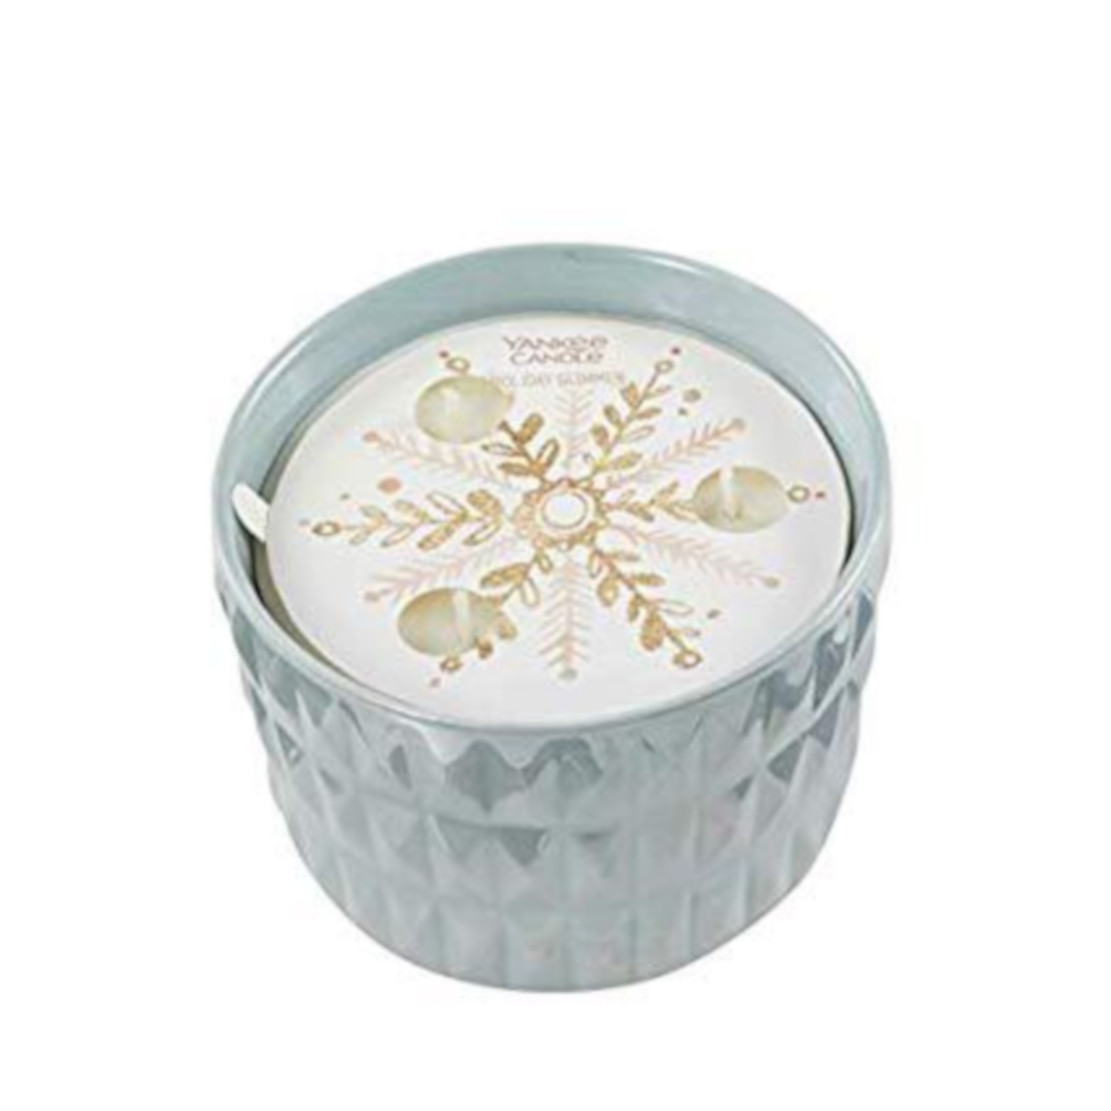 Yankee Candle Holiday Glimmer Winter Wish Ceramic Candle